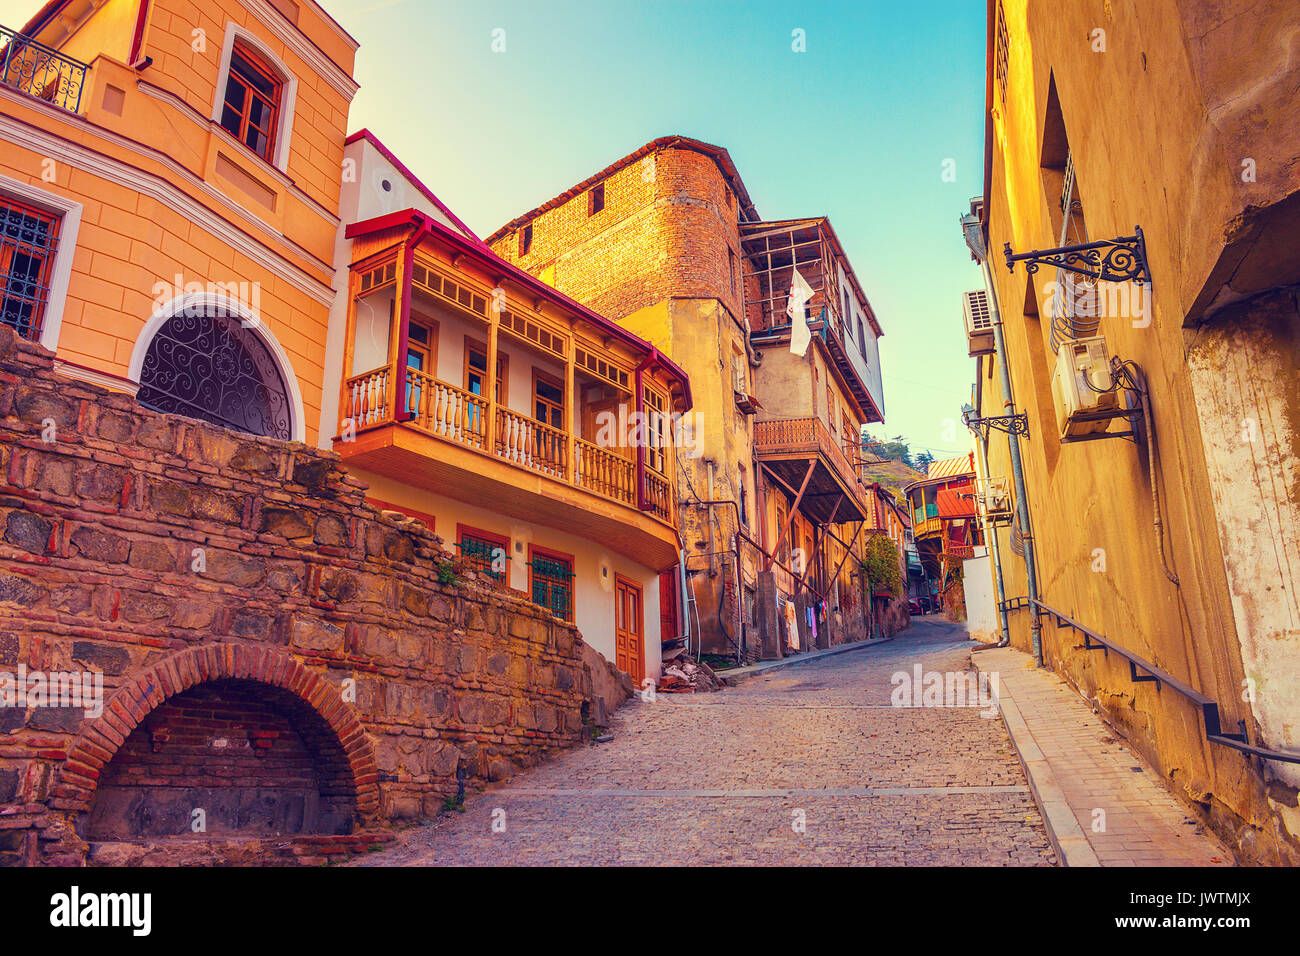 Old quarter in Tbilisi city, Georgia country Stock Photo